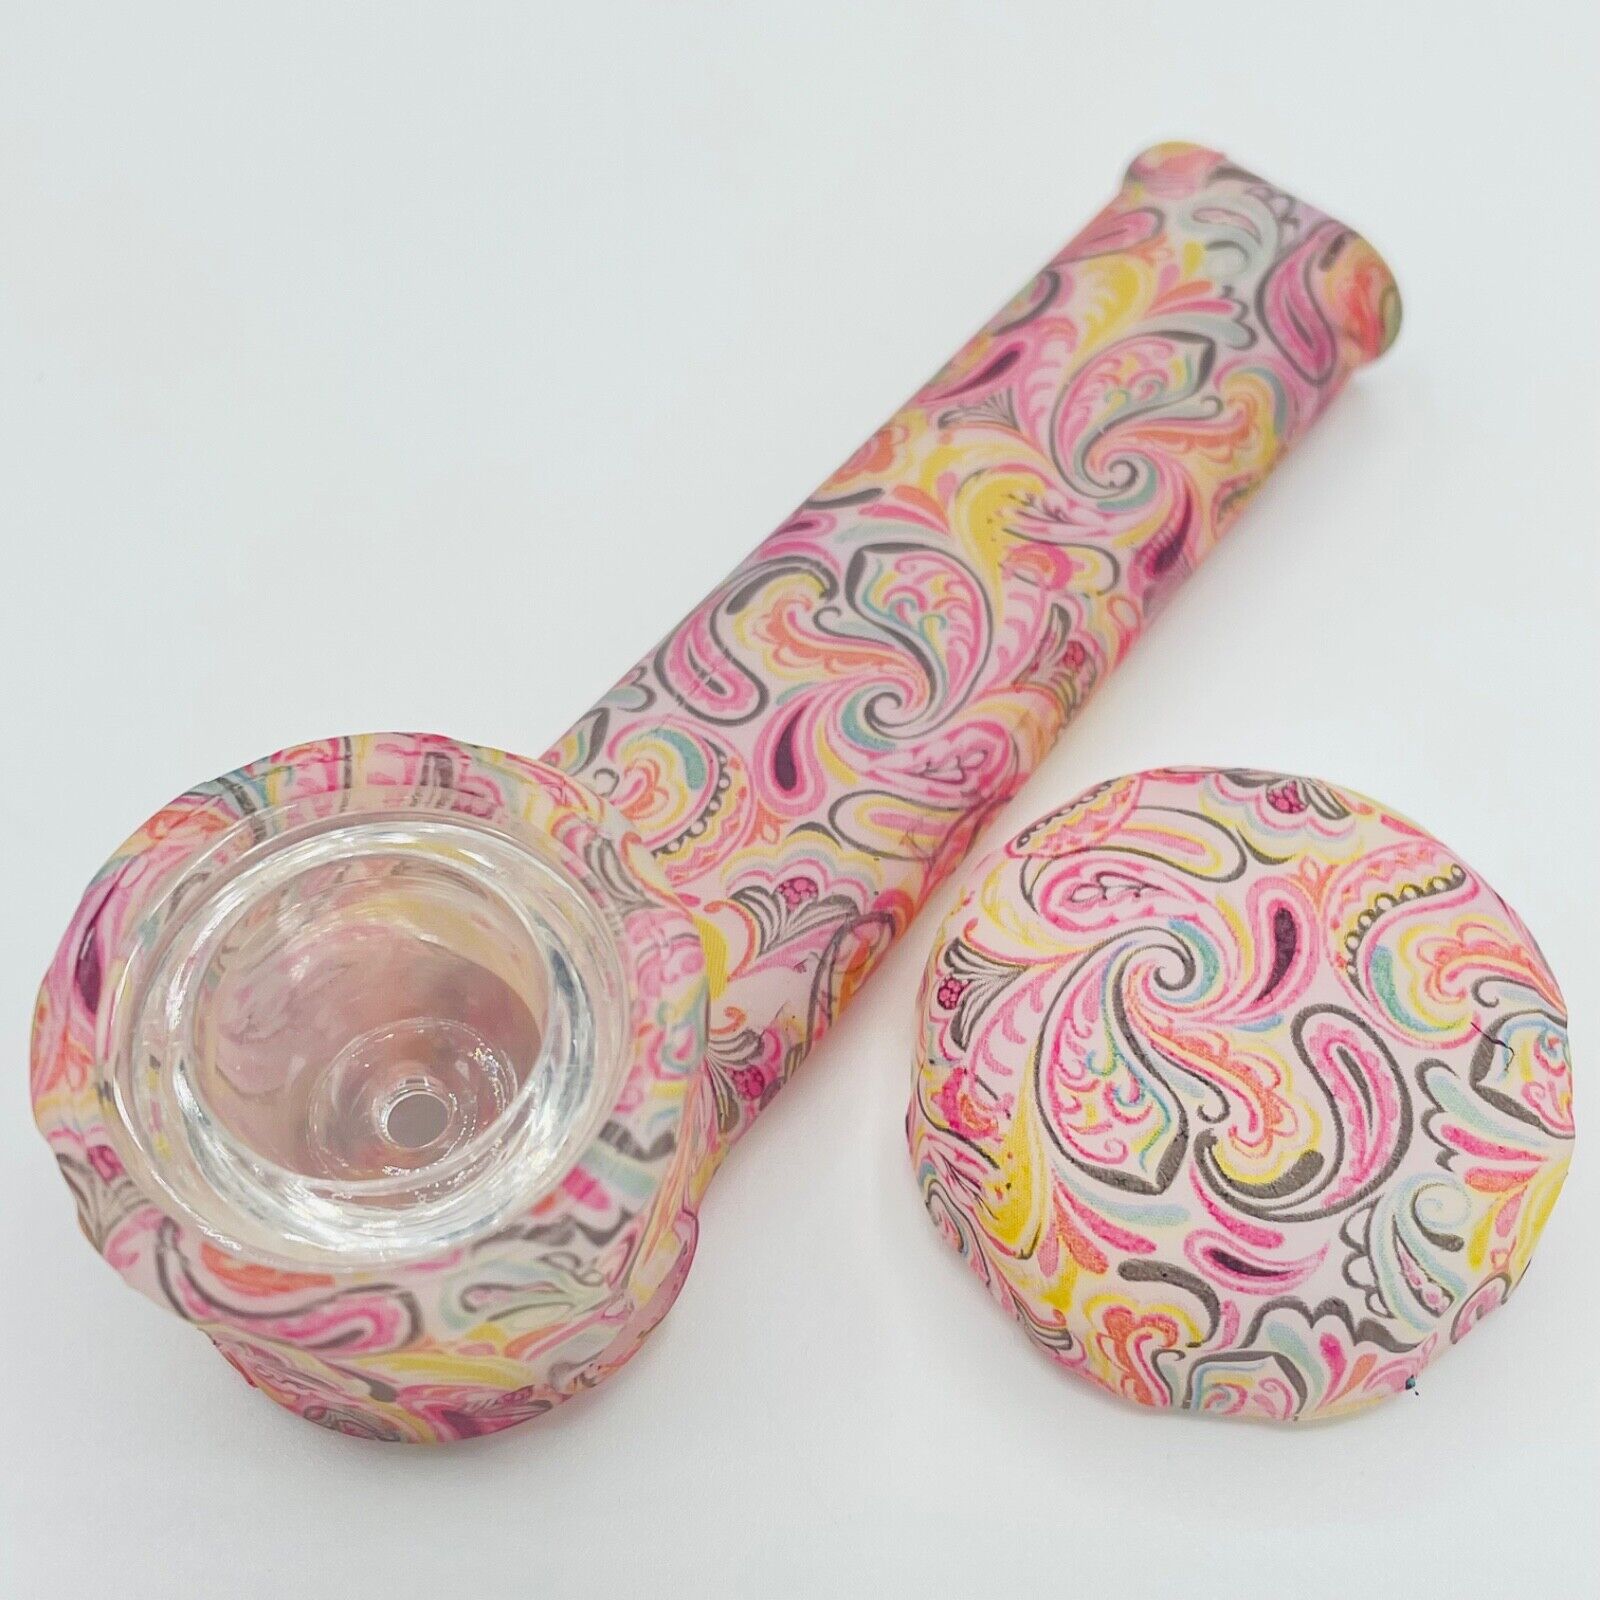 Silicone Smoking Pipe with Glass Bowl & Cap Lid | Glow-n-dark Paisley | USA